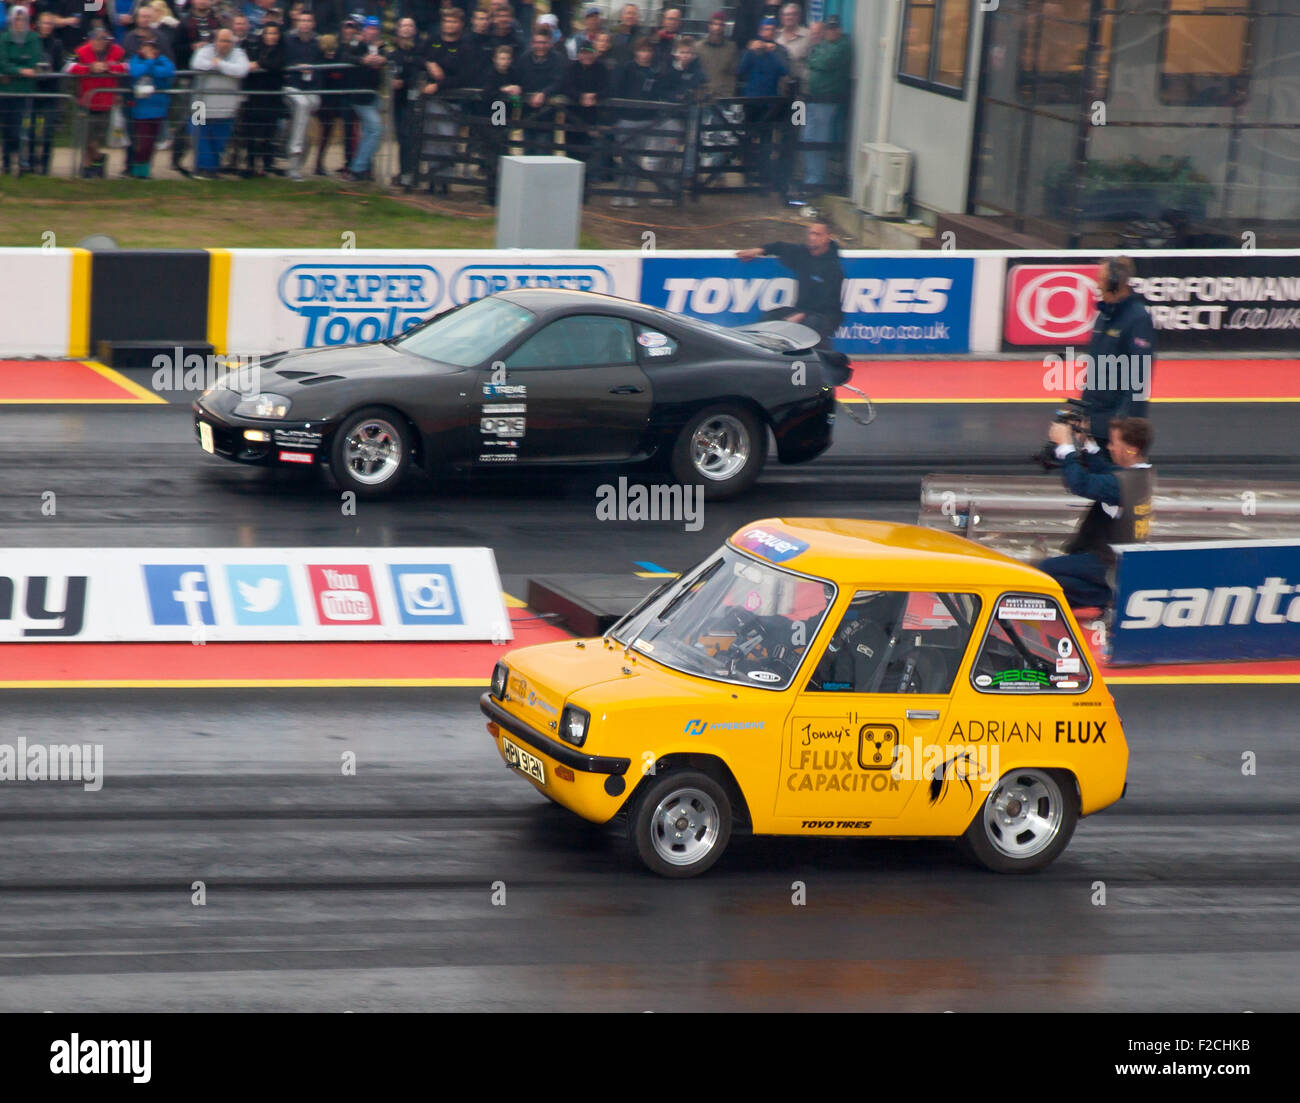 Electric car drag racing in the Pro ET class at Santa Pod. Jonny Smith nearside driving an Enfield 8000. Stock Photo